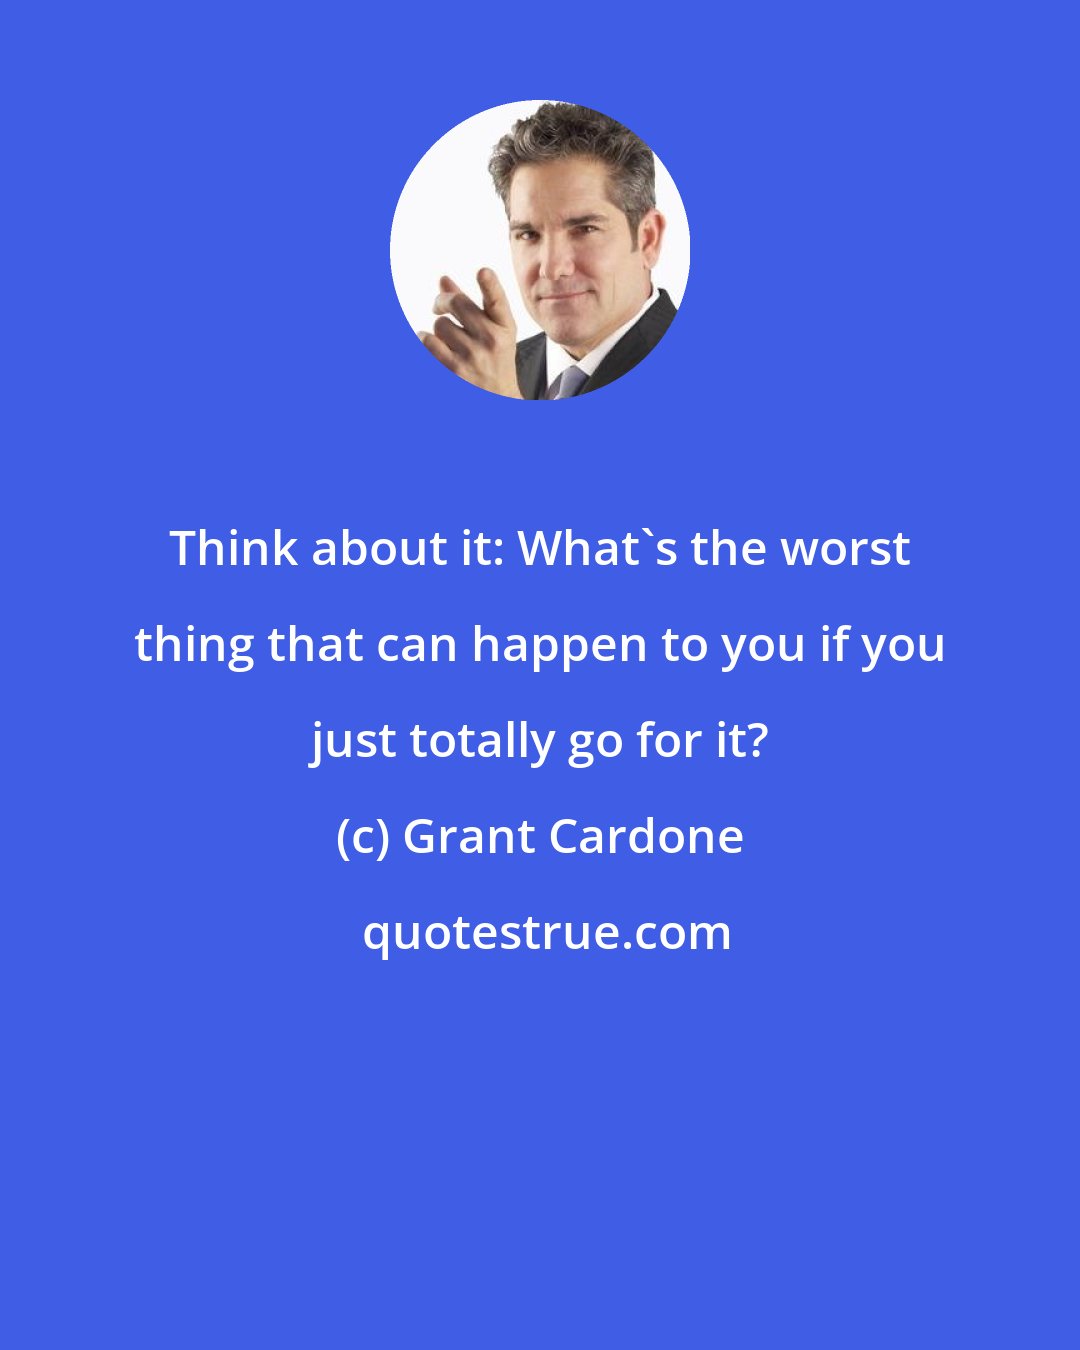 Grant Cardone: Think about it: What's the worst thing that can happen to you if you just totally go for it?